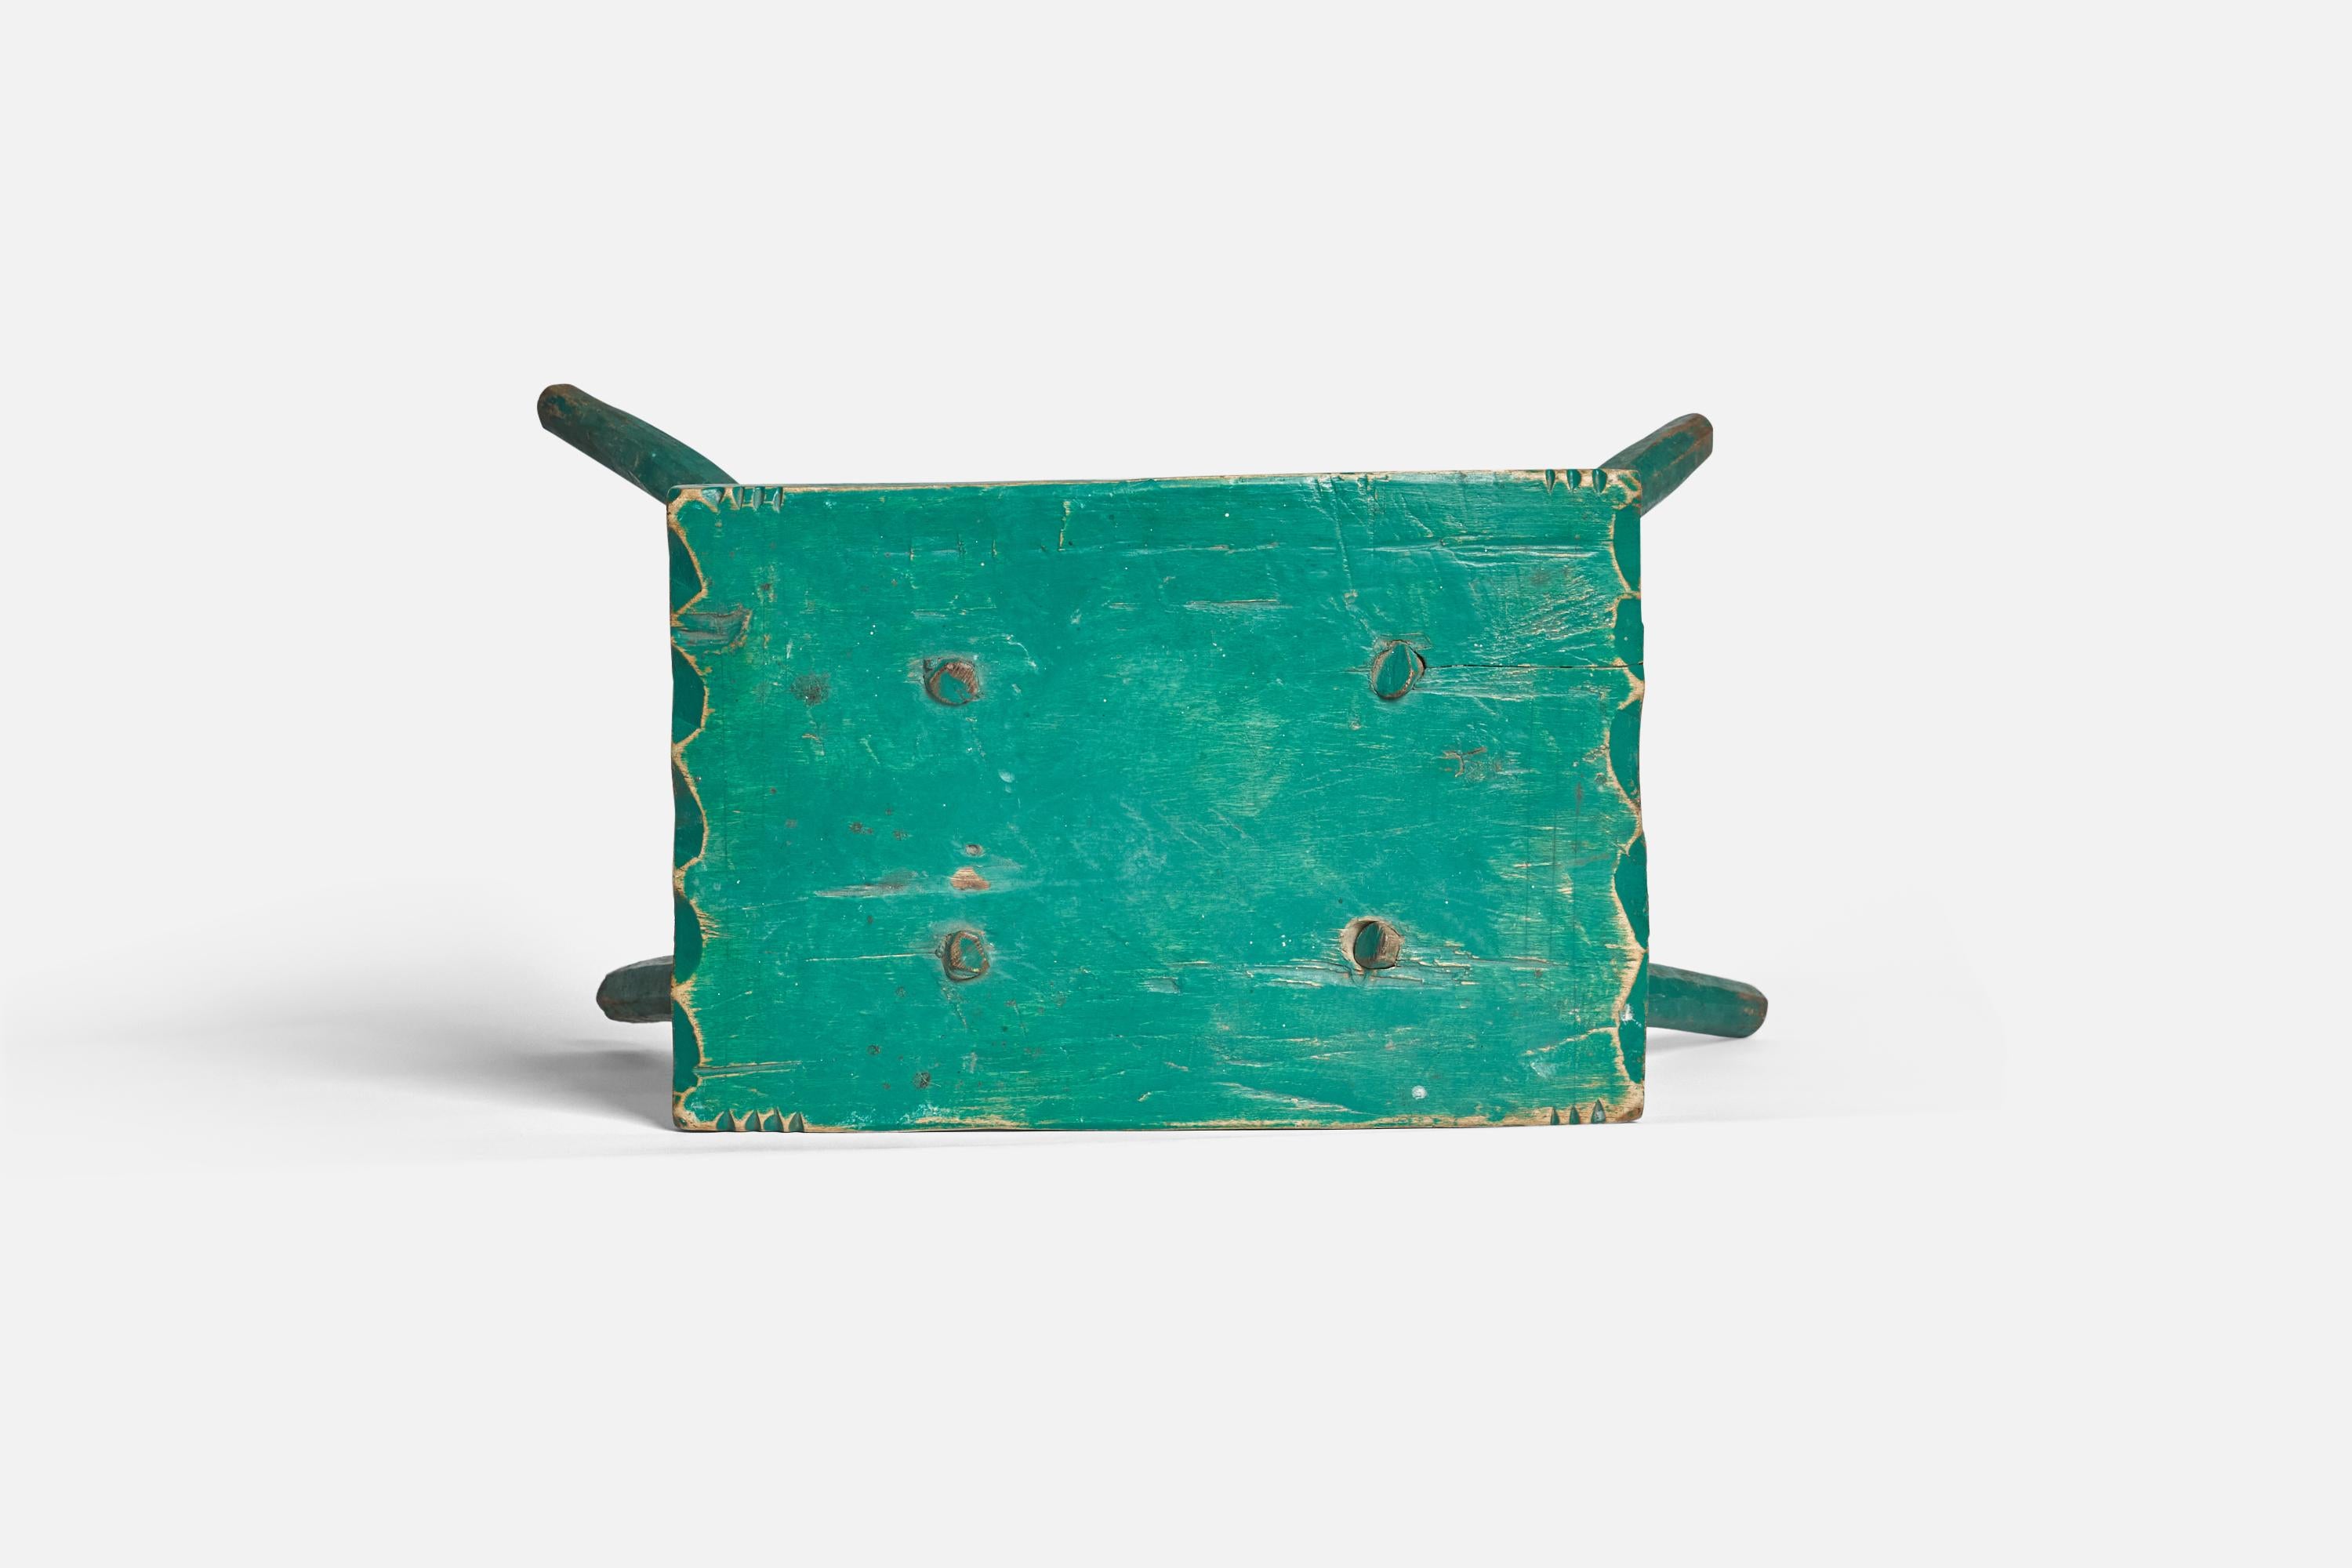 Swedish Folk Art, Farmers Stool, Green-Painted Wood, Sweden, Early 19th Century  For Sale 2